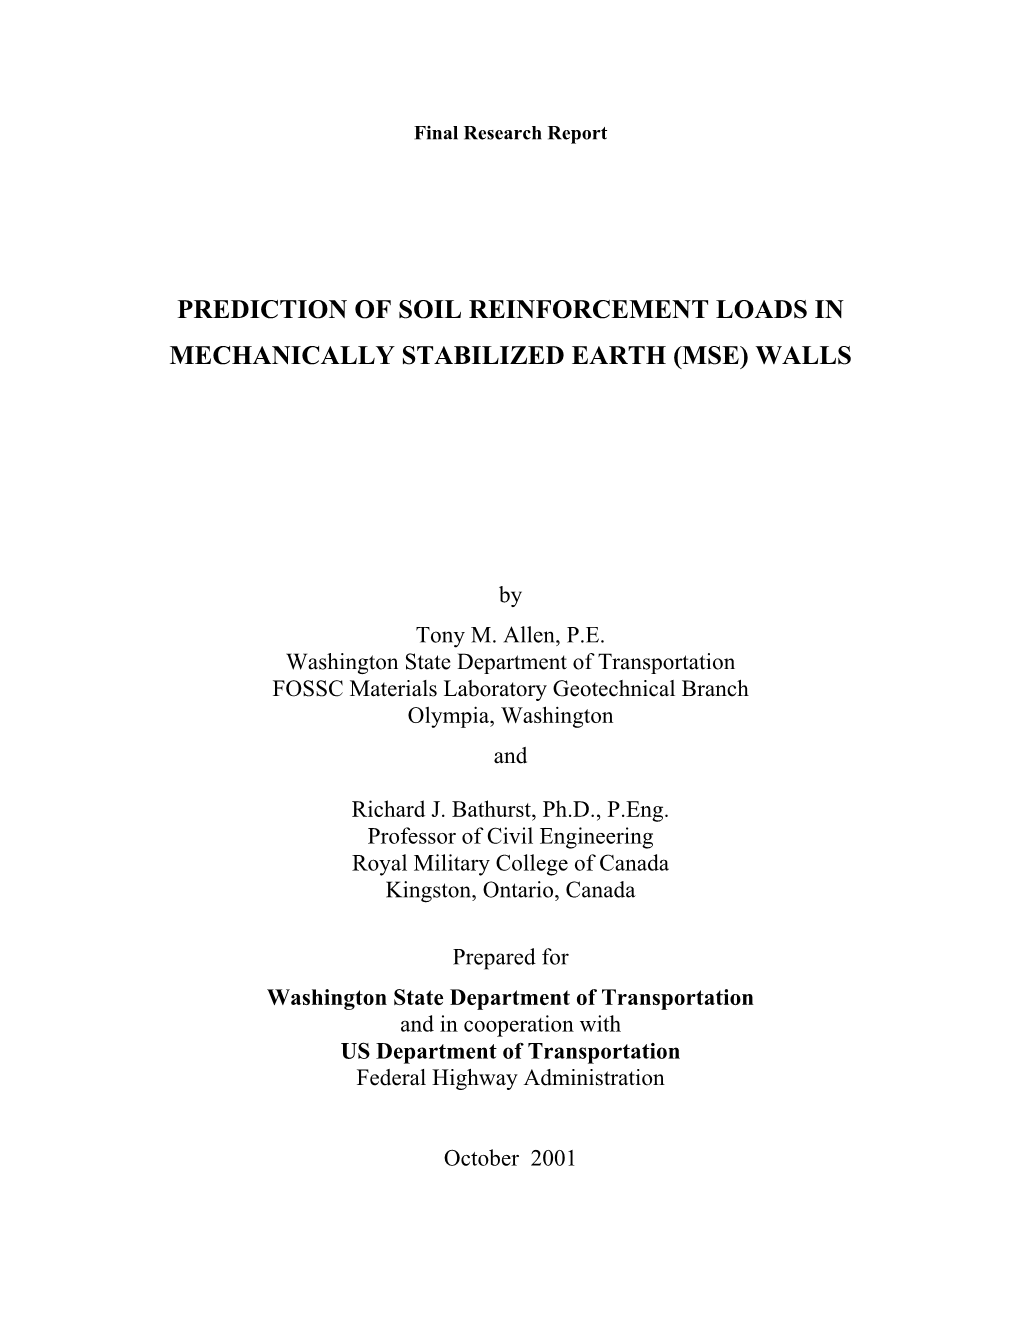 Prediction of Soil Reinforcement Loads in Mechanically Stabilized Earth (Mse) Walls